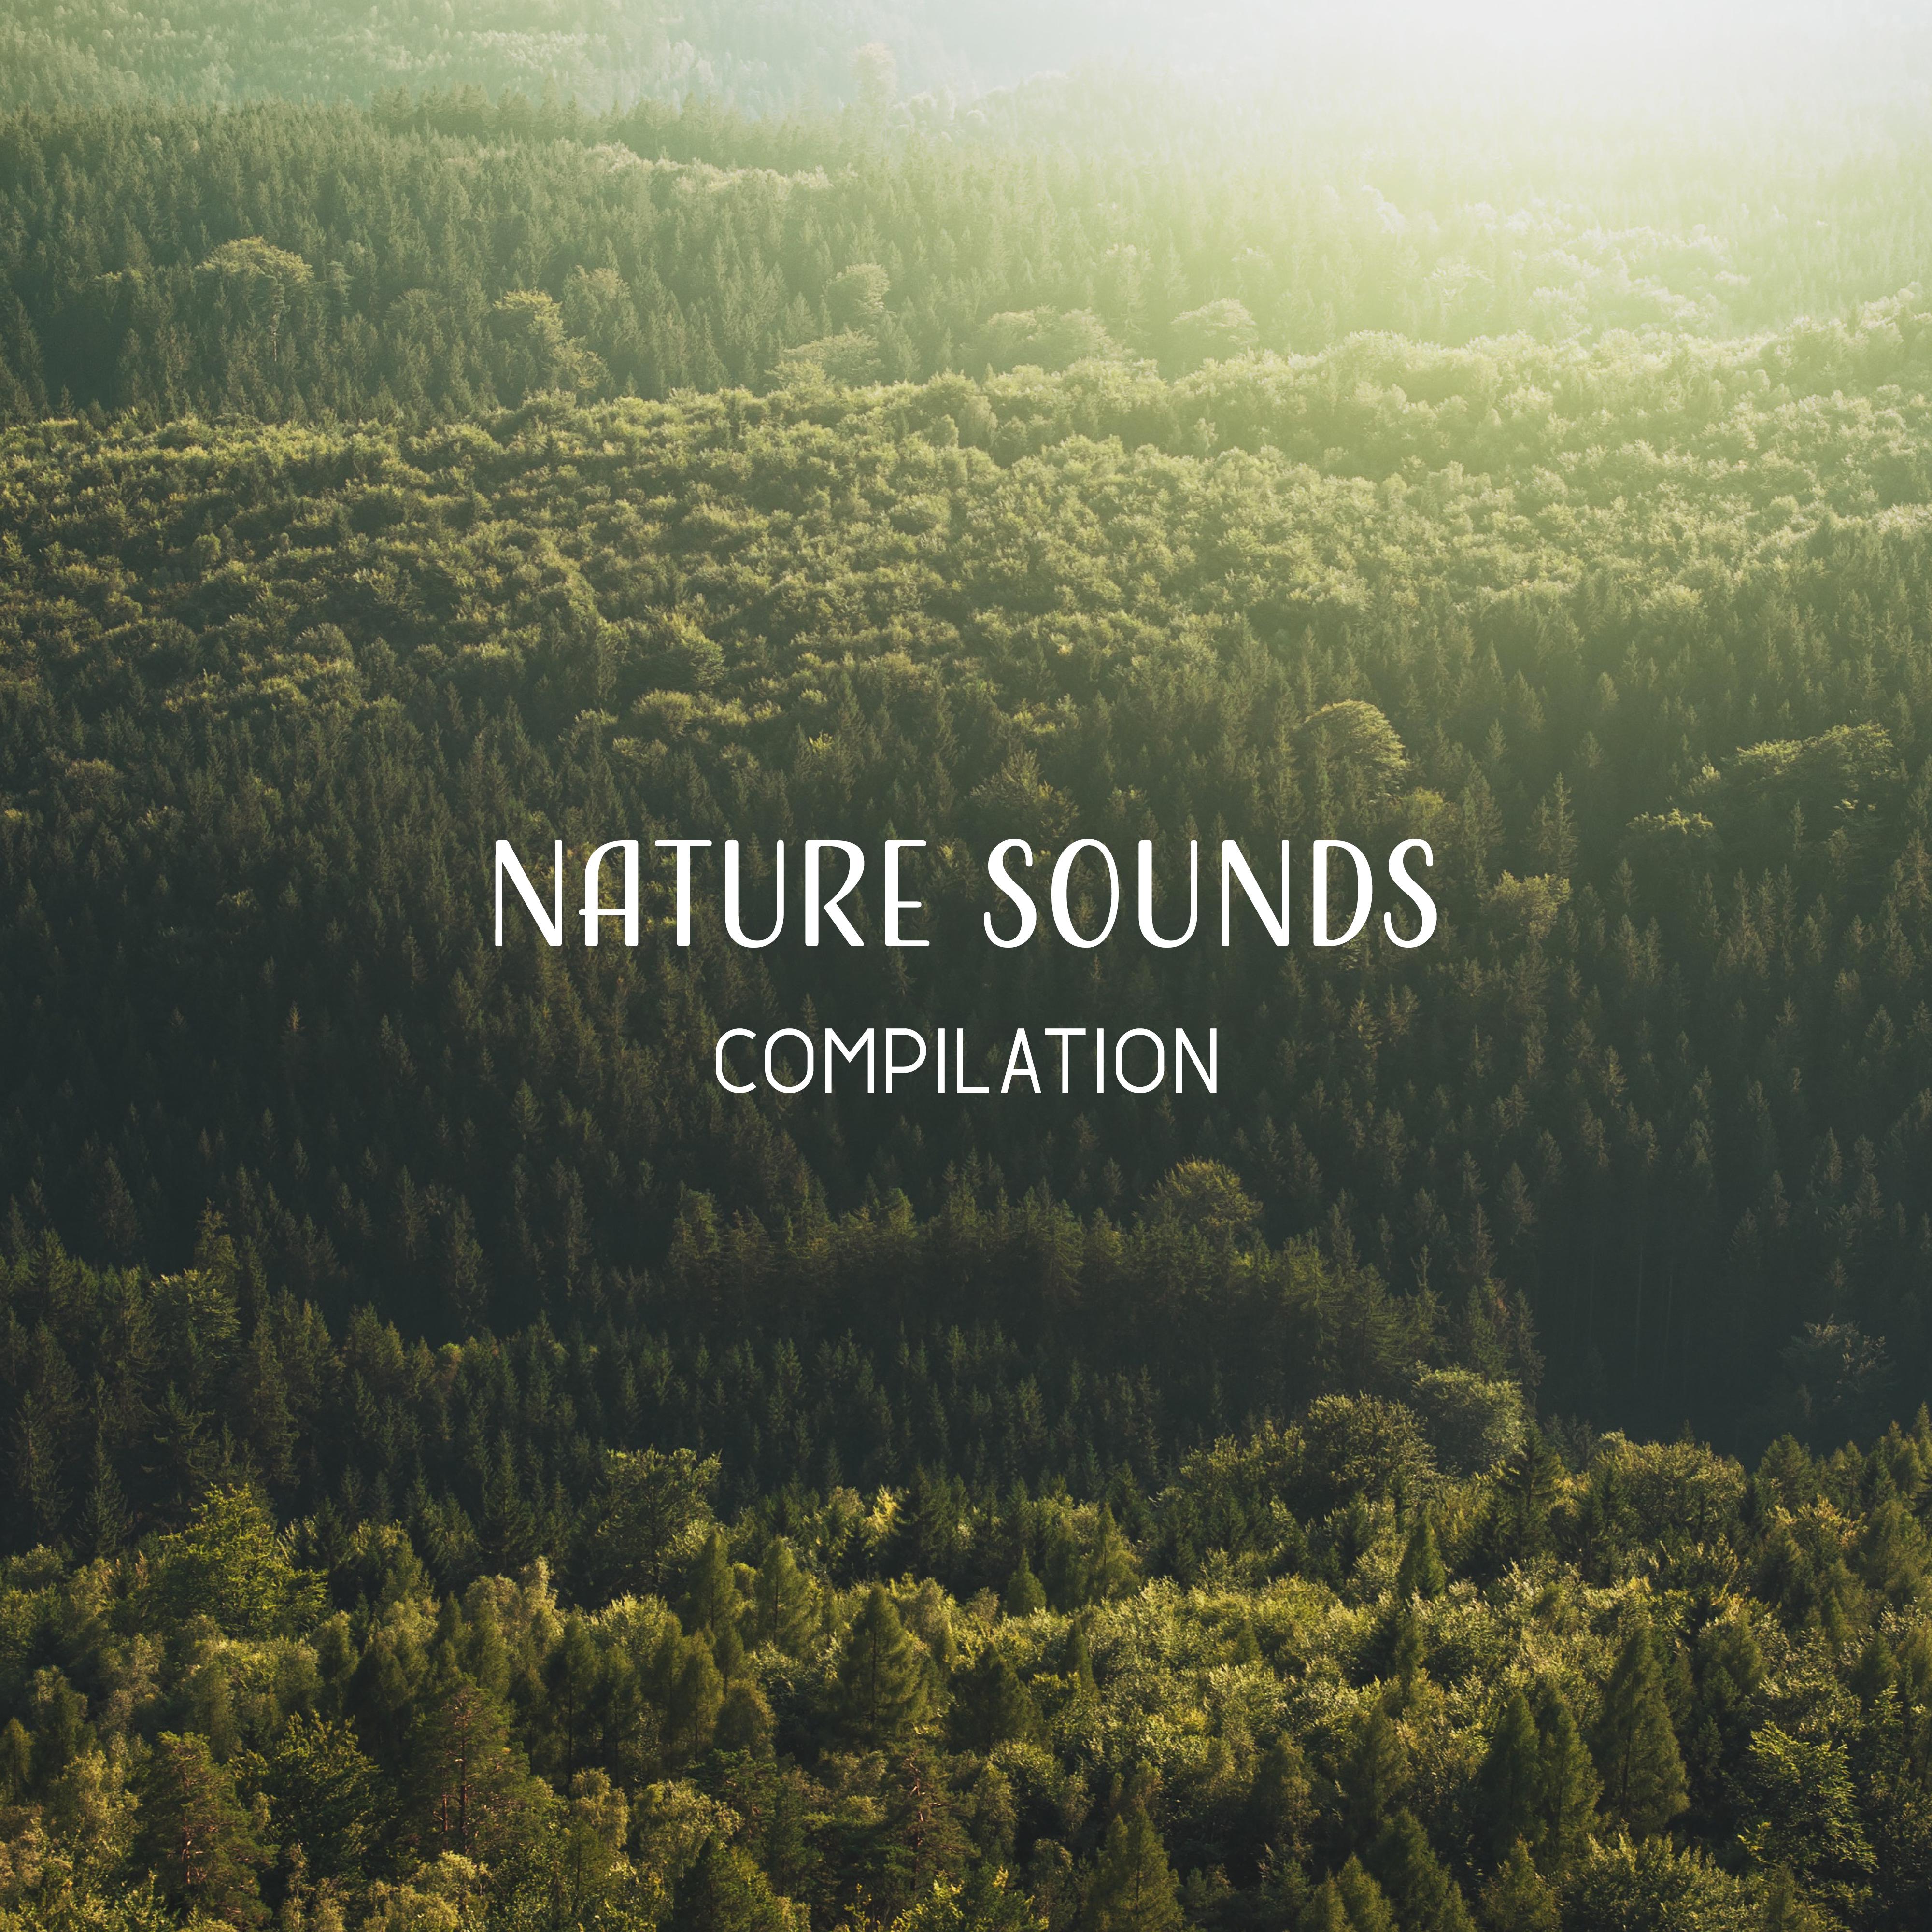 Nature Sounds Compilation – Relaxing Music, Full of Nature Sounds, Massage Music, New Age